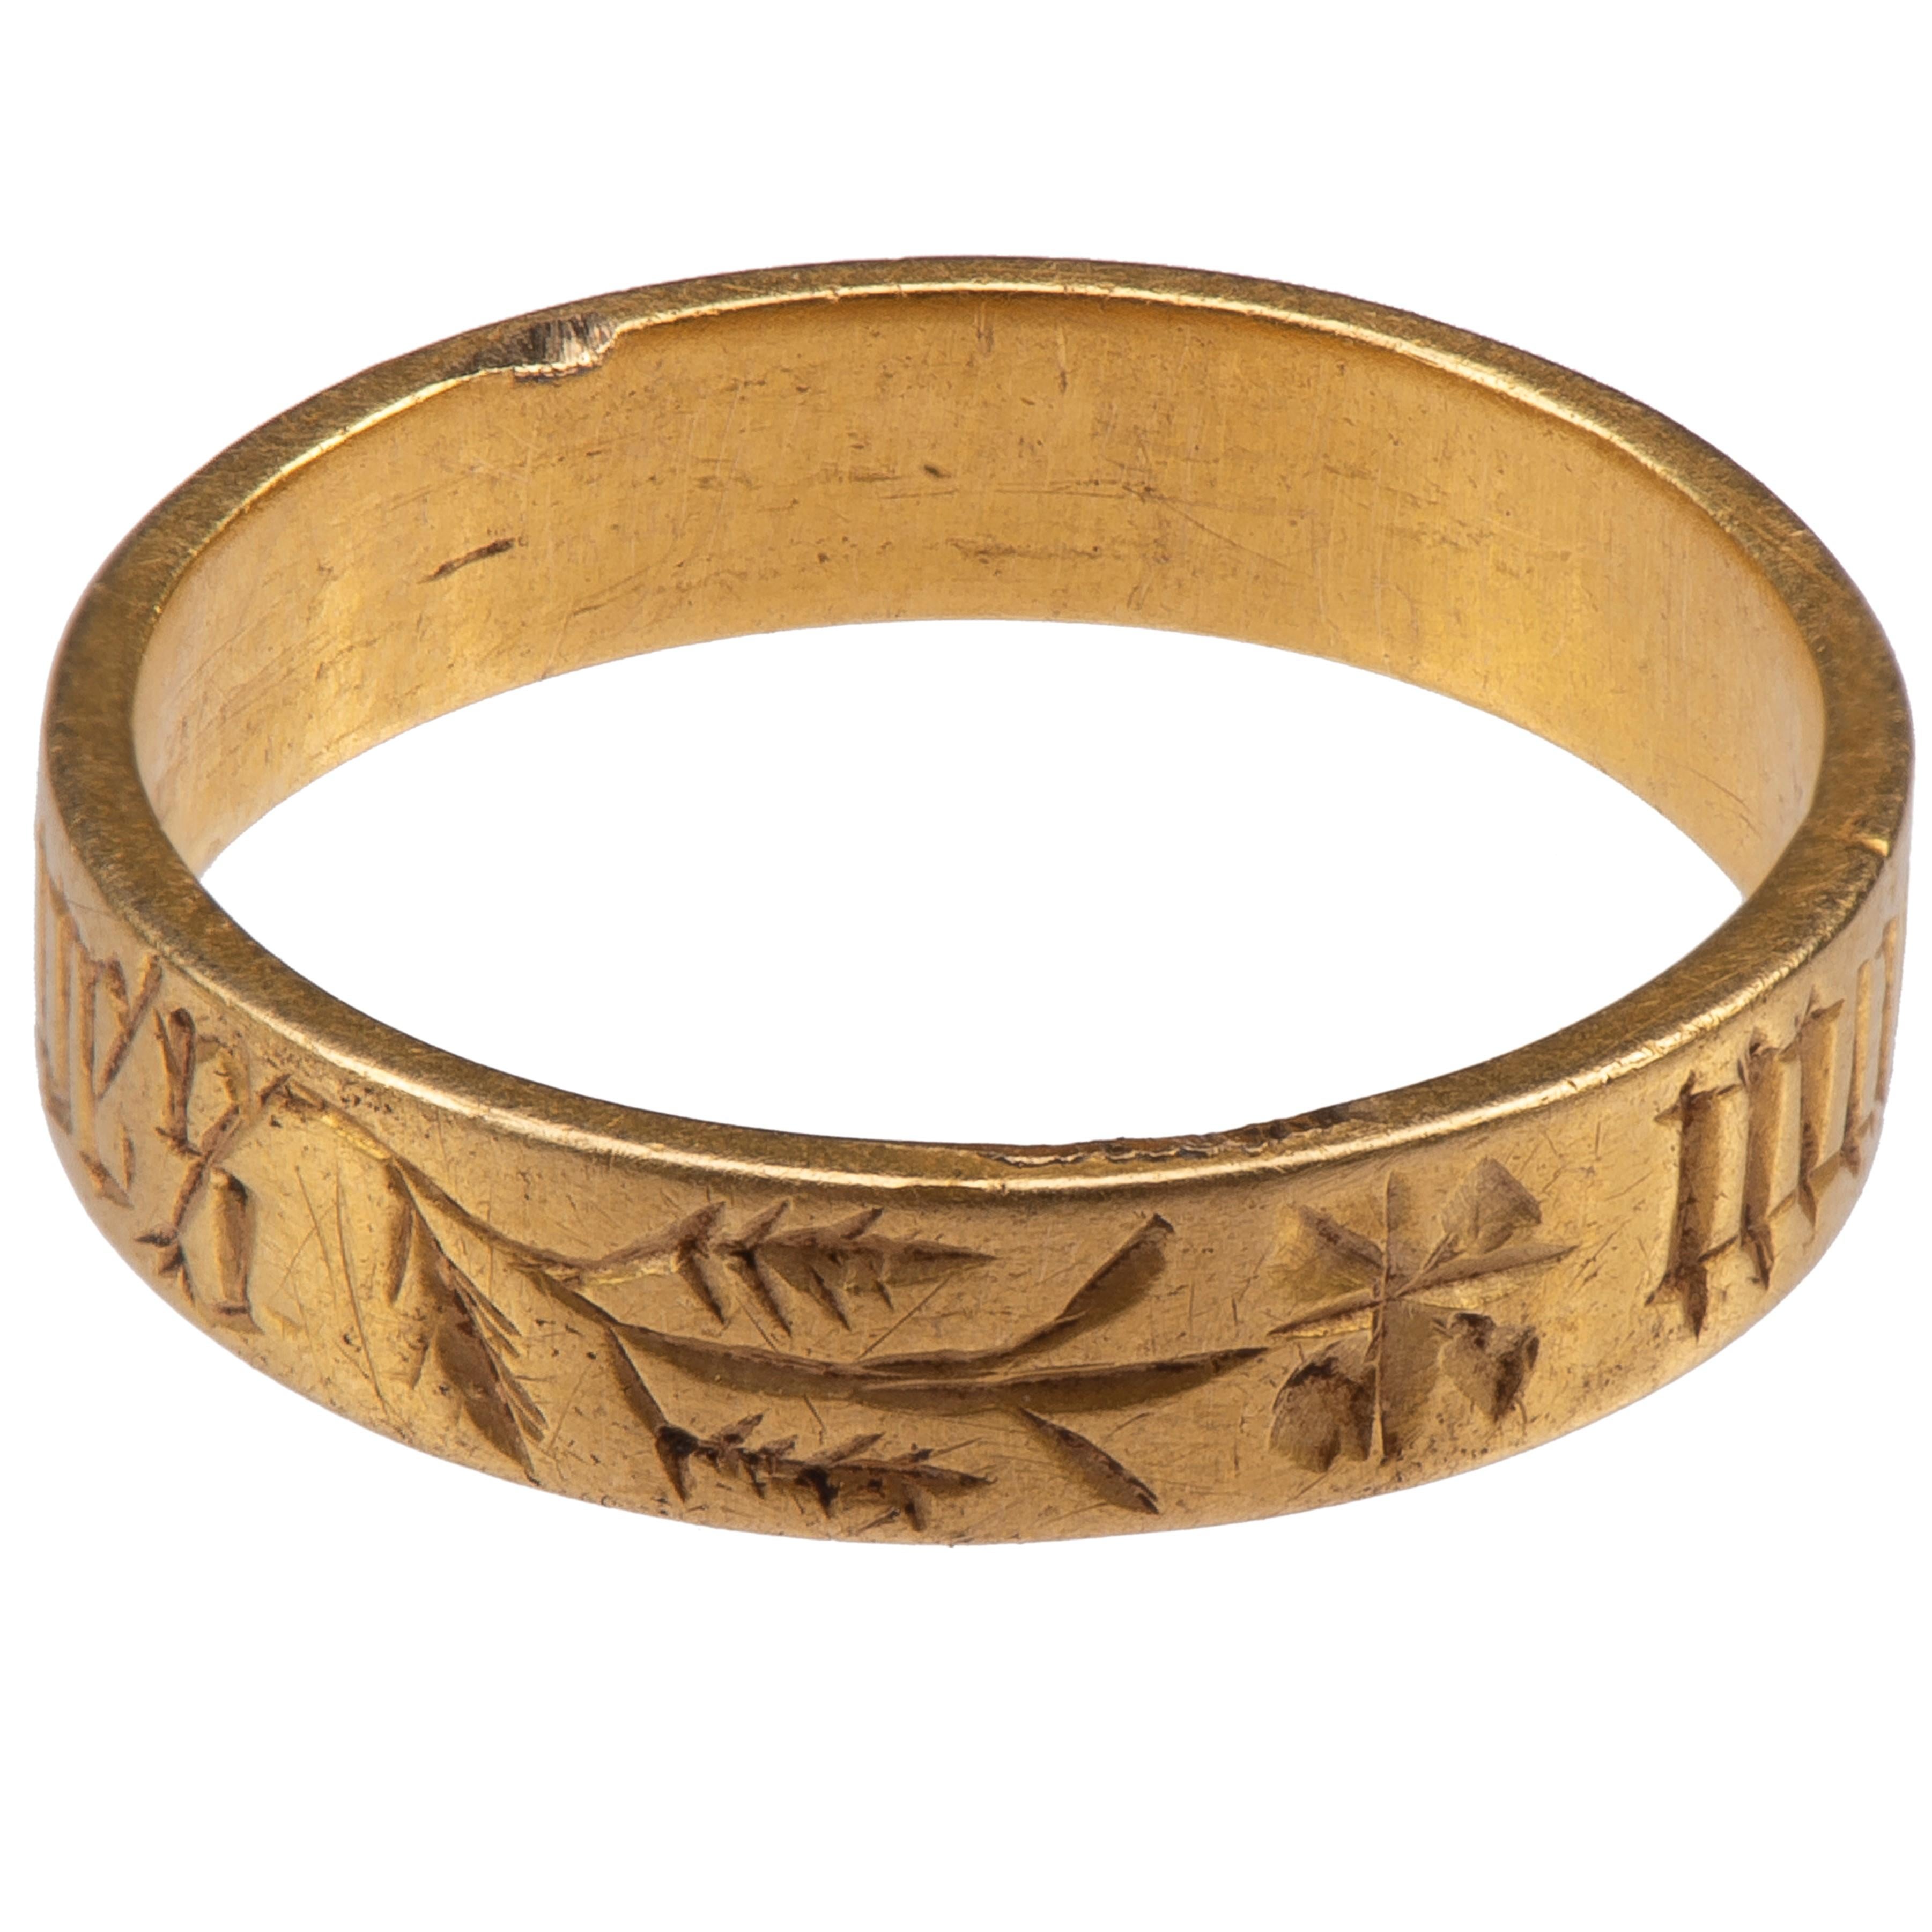 Posy ring with ‘MON COER AVES’
England, c. 1450
Gold
Weight 3.2 gr; Circumference 53.82 mm; US size 6 3/4; UK size N ½
	
Description:
Wide gold band, plain on the interior and engraved on the exterior with the black letter inscription in French: 